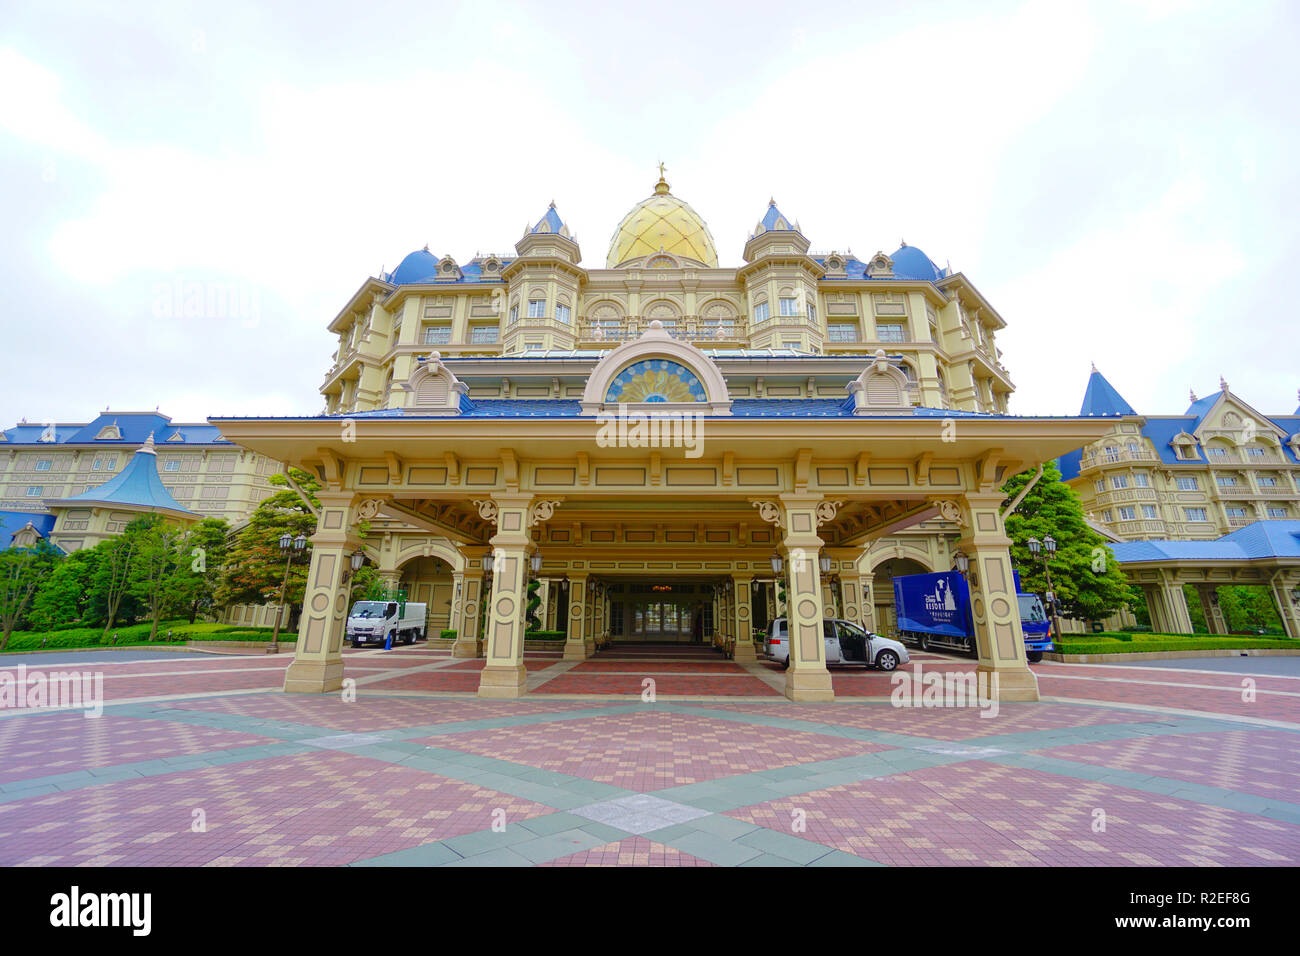 The Tokyo Disneyland Hotel located in front of the Tokyo Disneyland park with the Tokyo Disneyland station of the Disney Resort Line monorail system i Stock Photo